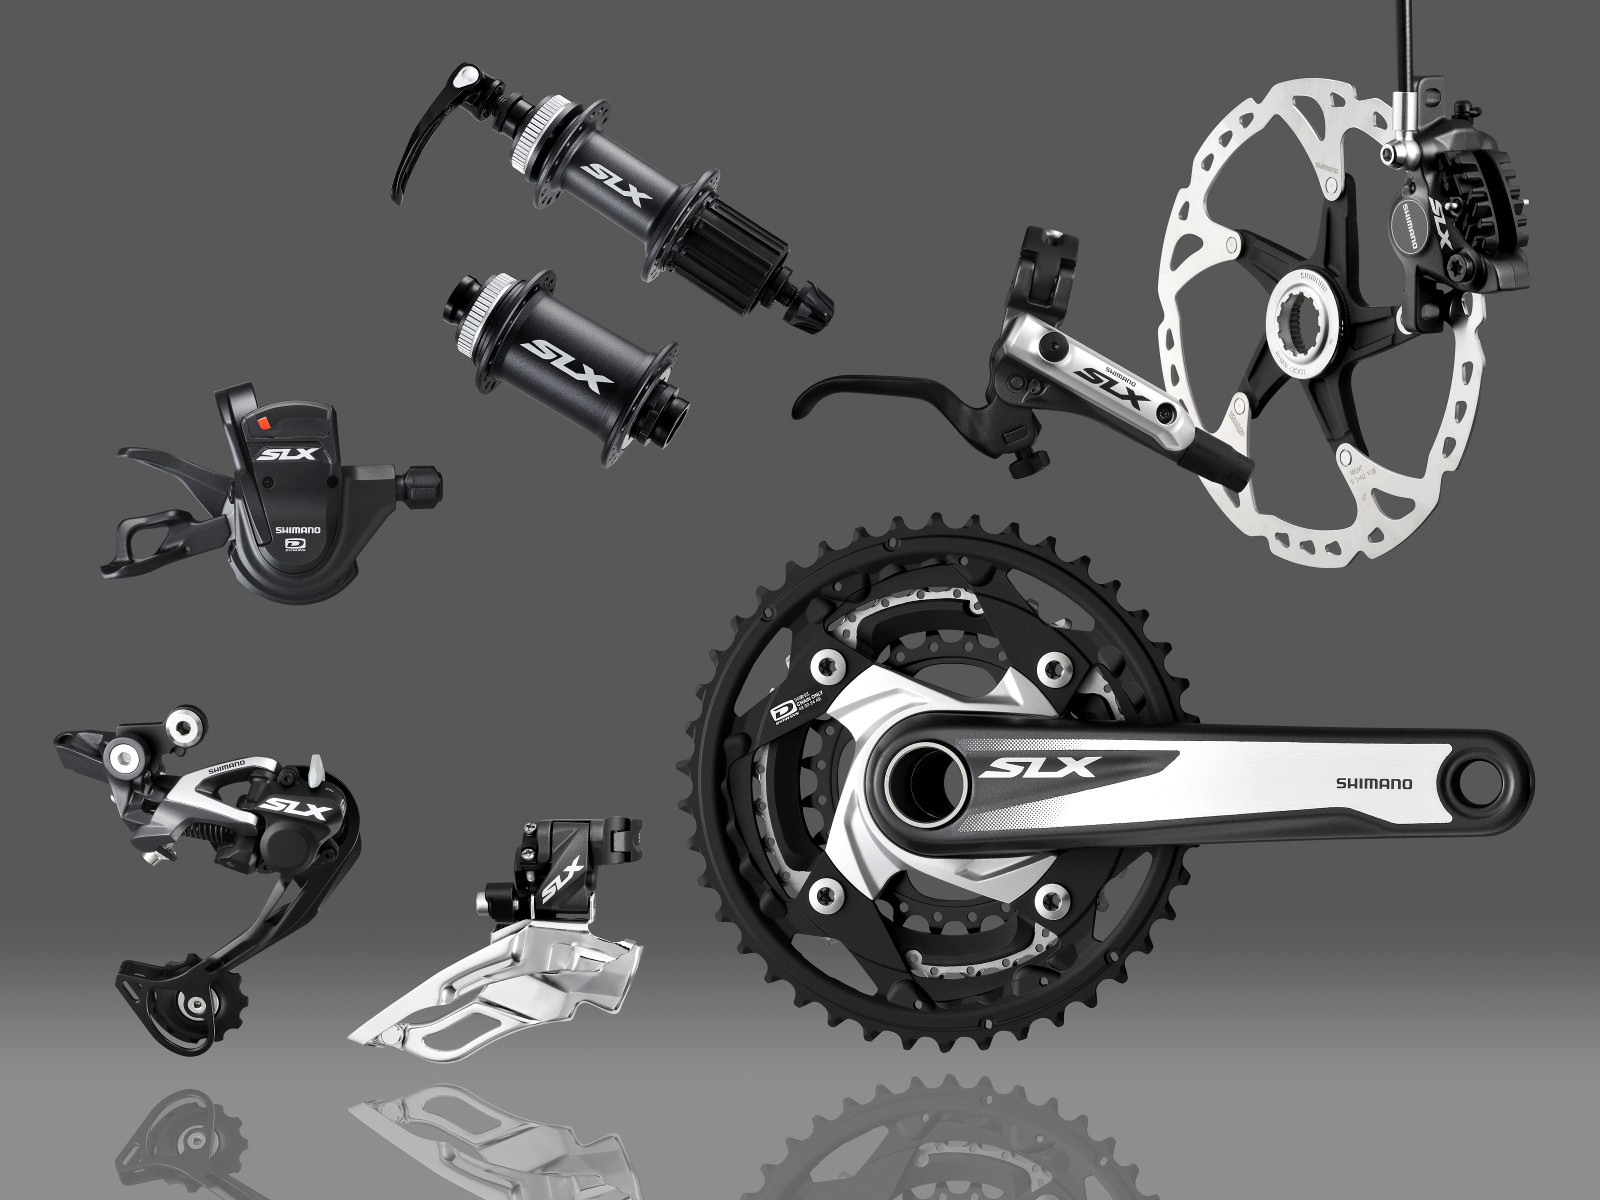 The 2013 SLX group looks great and it is nearly as brilliant on the technical side as XTR. We expect to see SLX on performance bikes priced in the $3000 range.